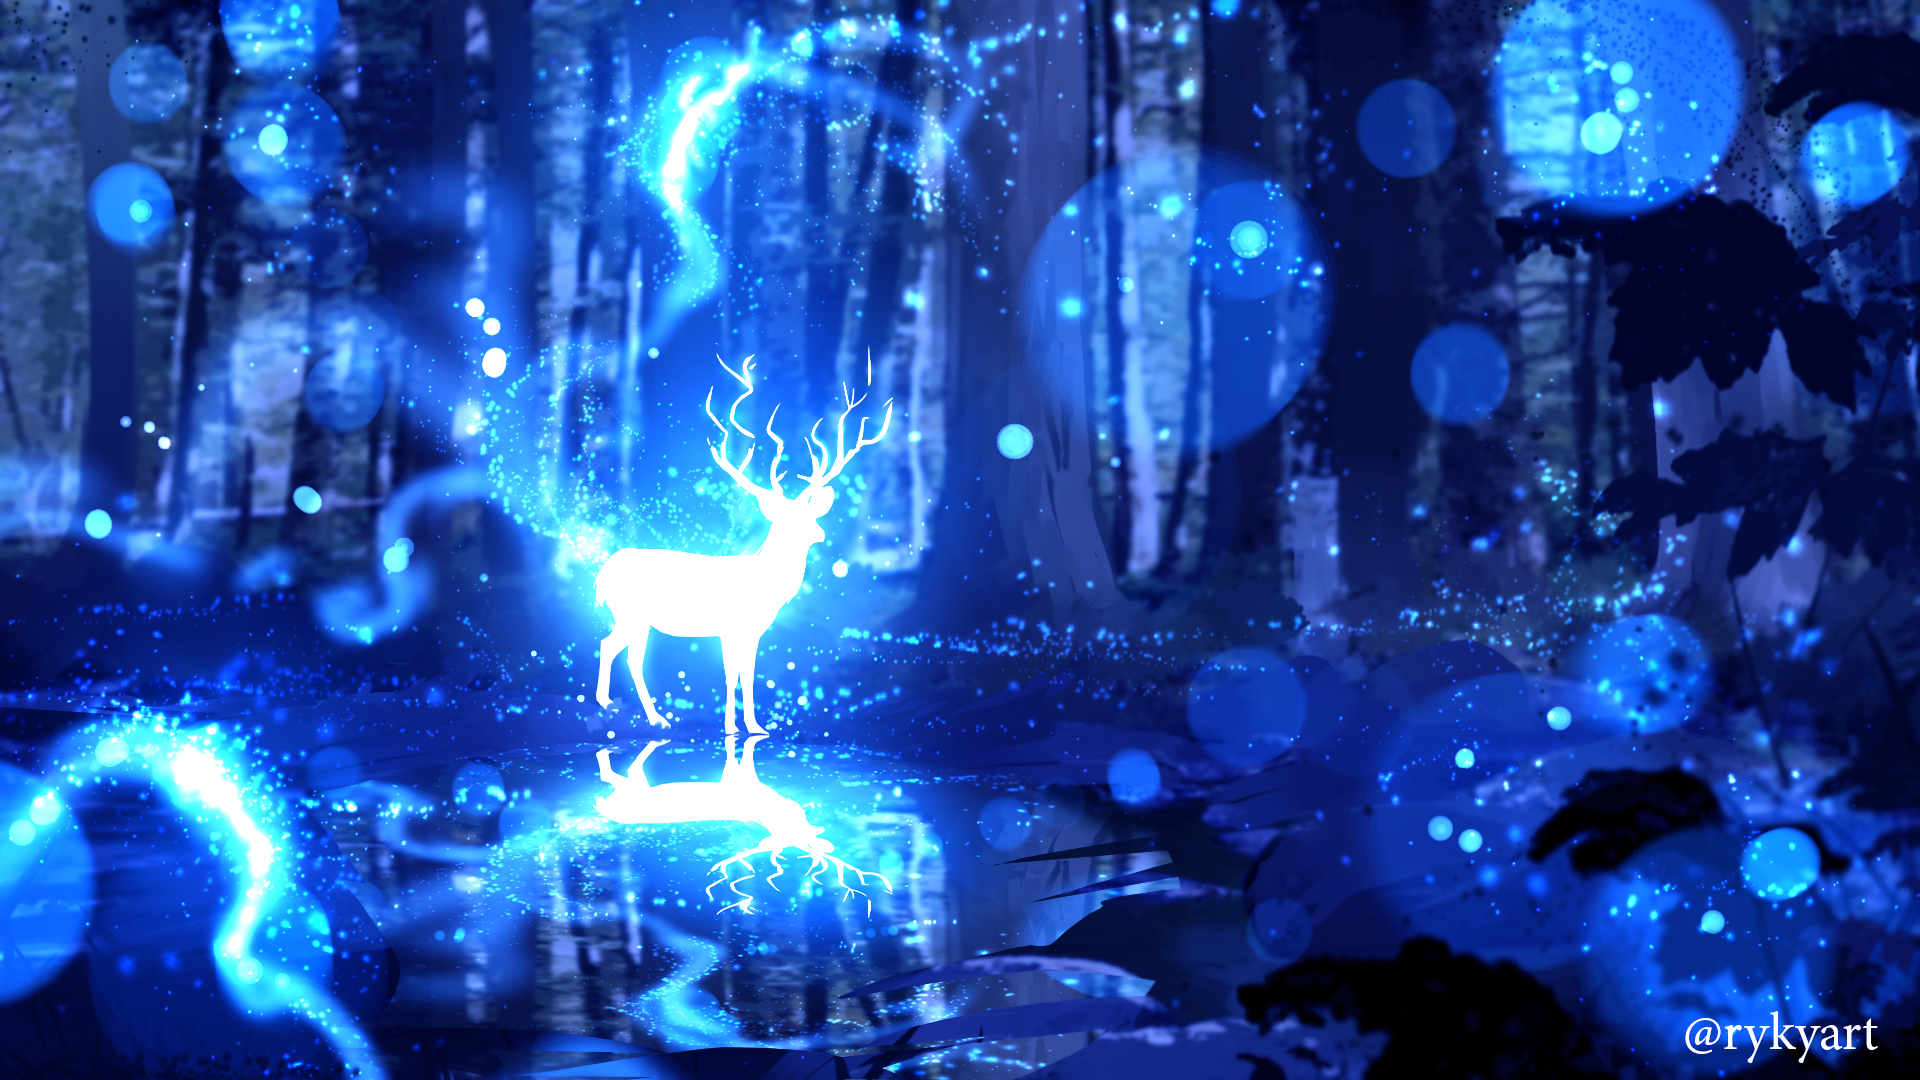 General 1920x1080 digital art artwork fantasy art drawing painting digital painting blue white magic animals deer ryky reflection forest trees landscape nature water lights